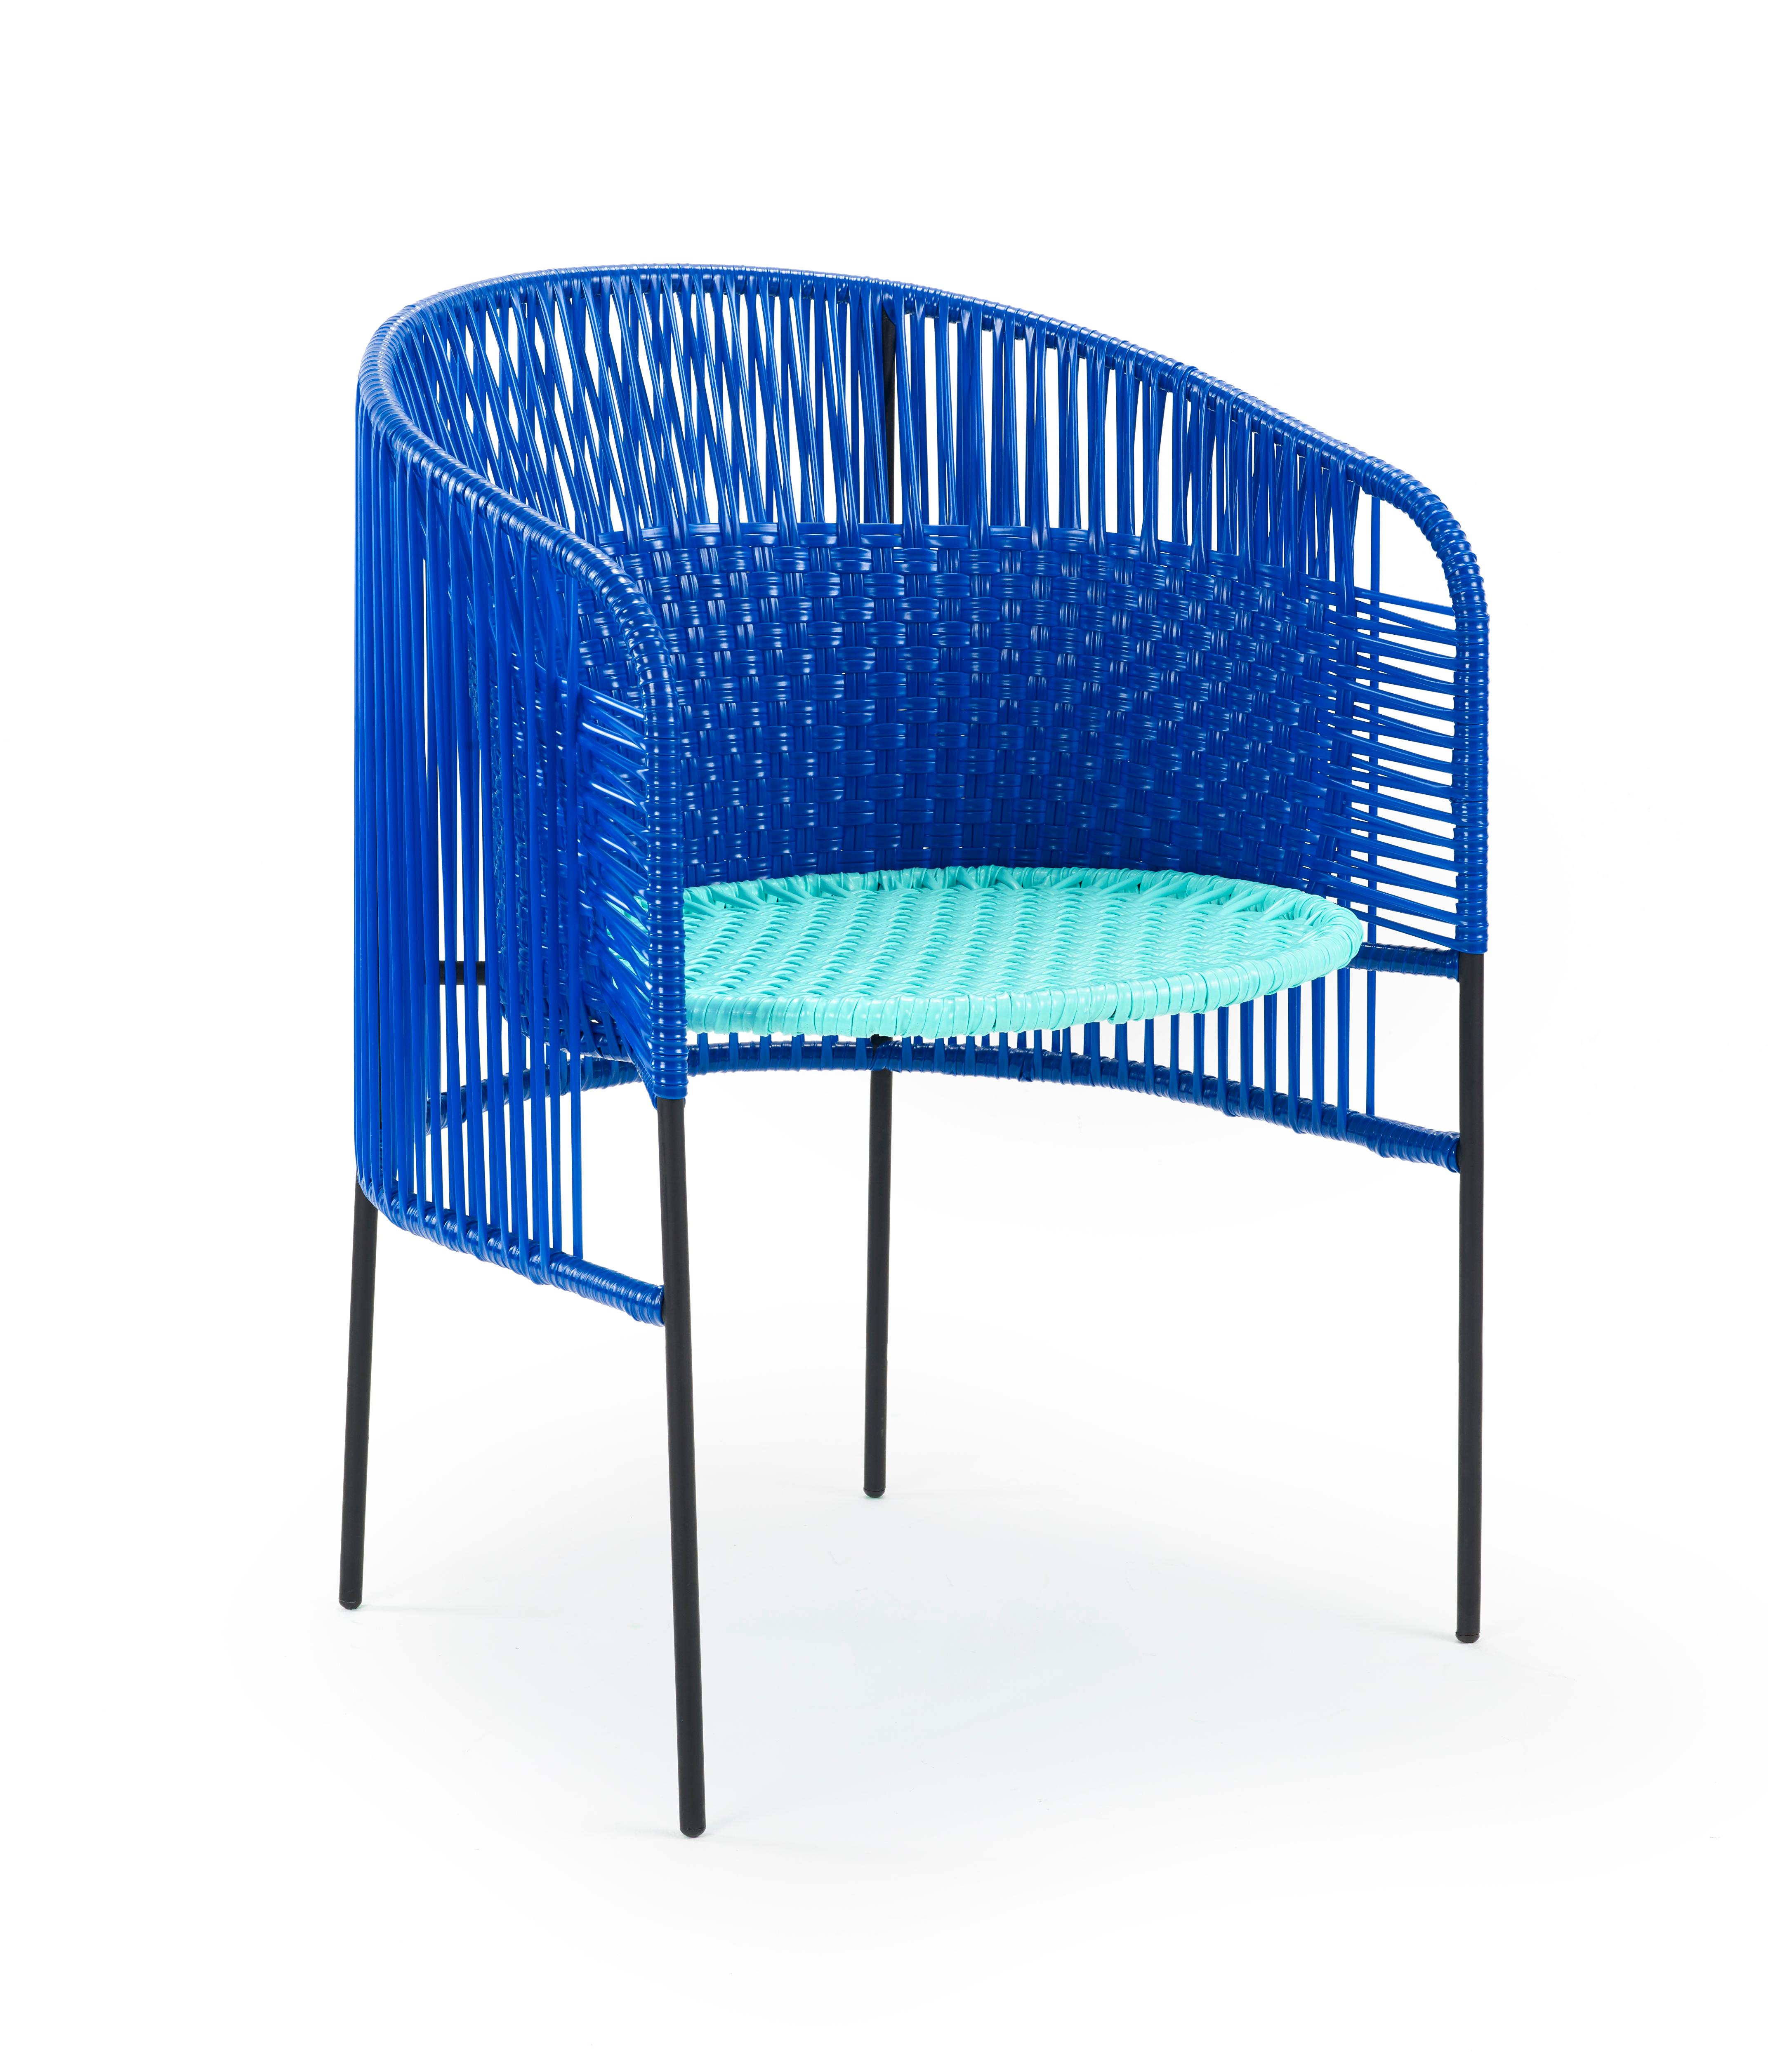 Set of 2 Blue caribe dining chair by Sebastian Herkner
Materials: Galvanized and powder-coated tubular steel. PVC strings are made from recycled plastic.
Technique: Made from recycled plastic and weaved by local craftspeople in Colombia.